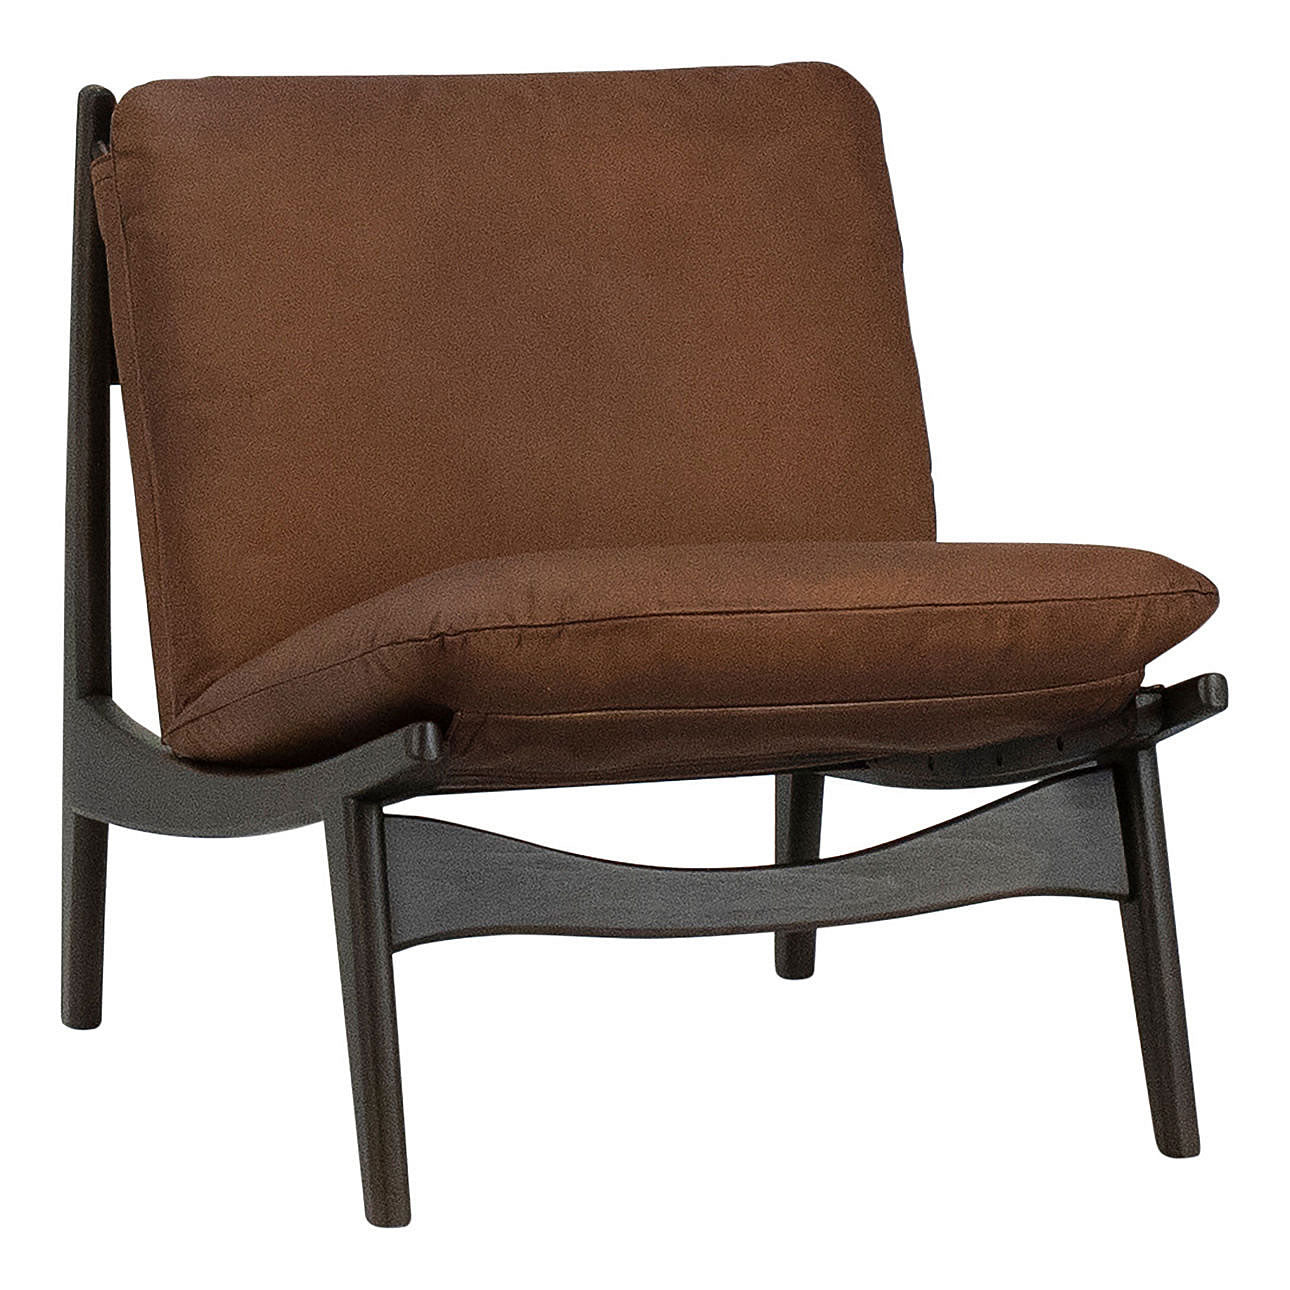 Rivoli MCM Lounge Chair in Brown Full Grain Leather Hollywood